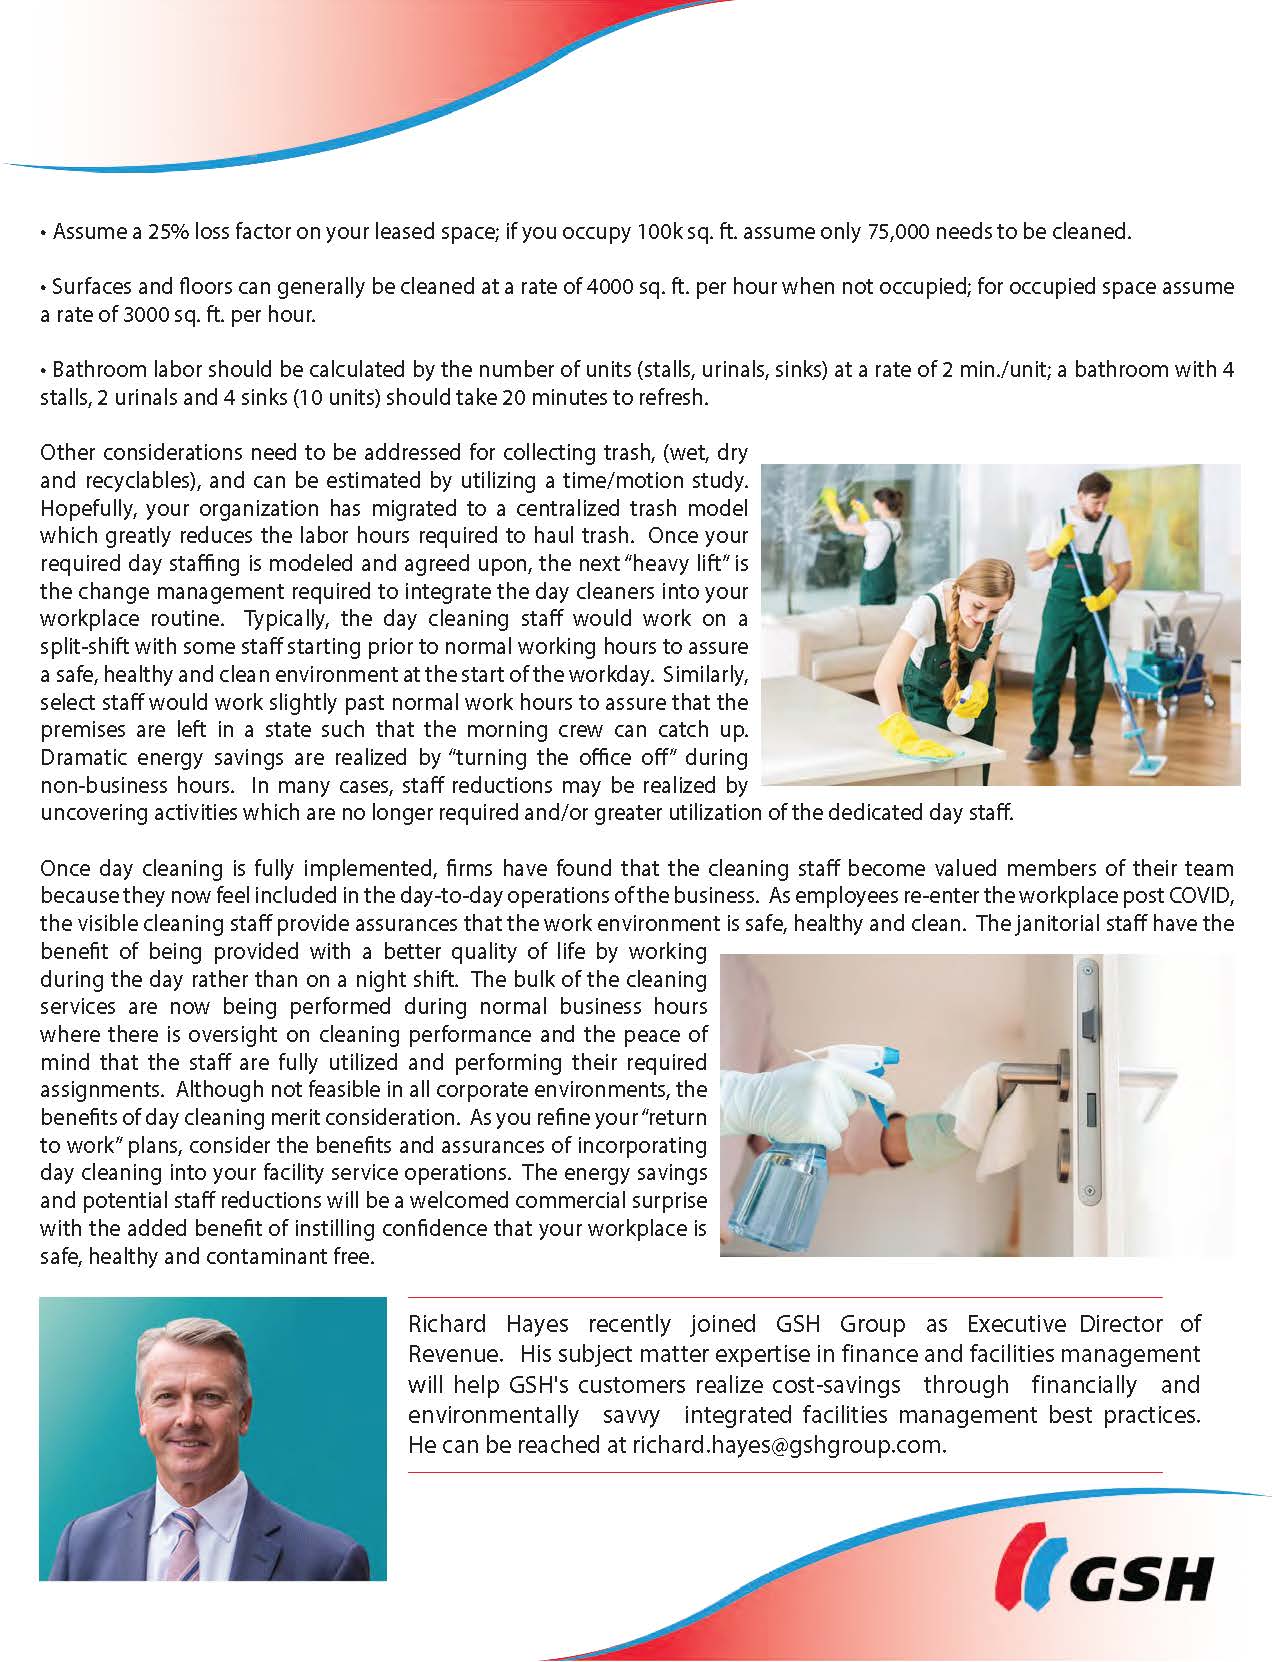 Prior to the COVID-19 pandemic, progressive firms looking to reduce energy costs, achieve CSR initiatives and gain greater control of their janitorial staff elected to perform daytime cleaning of their premises on a daily basis.